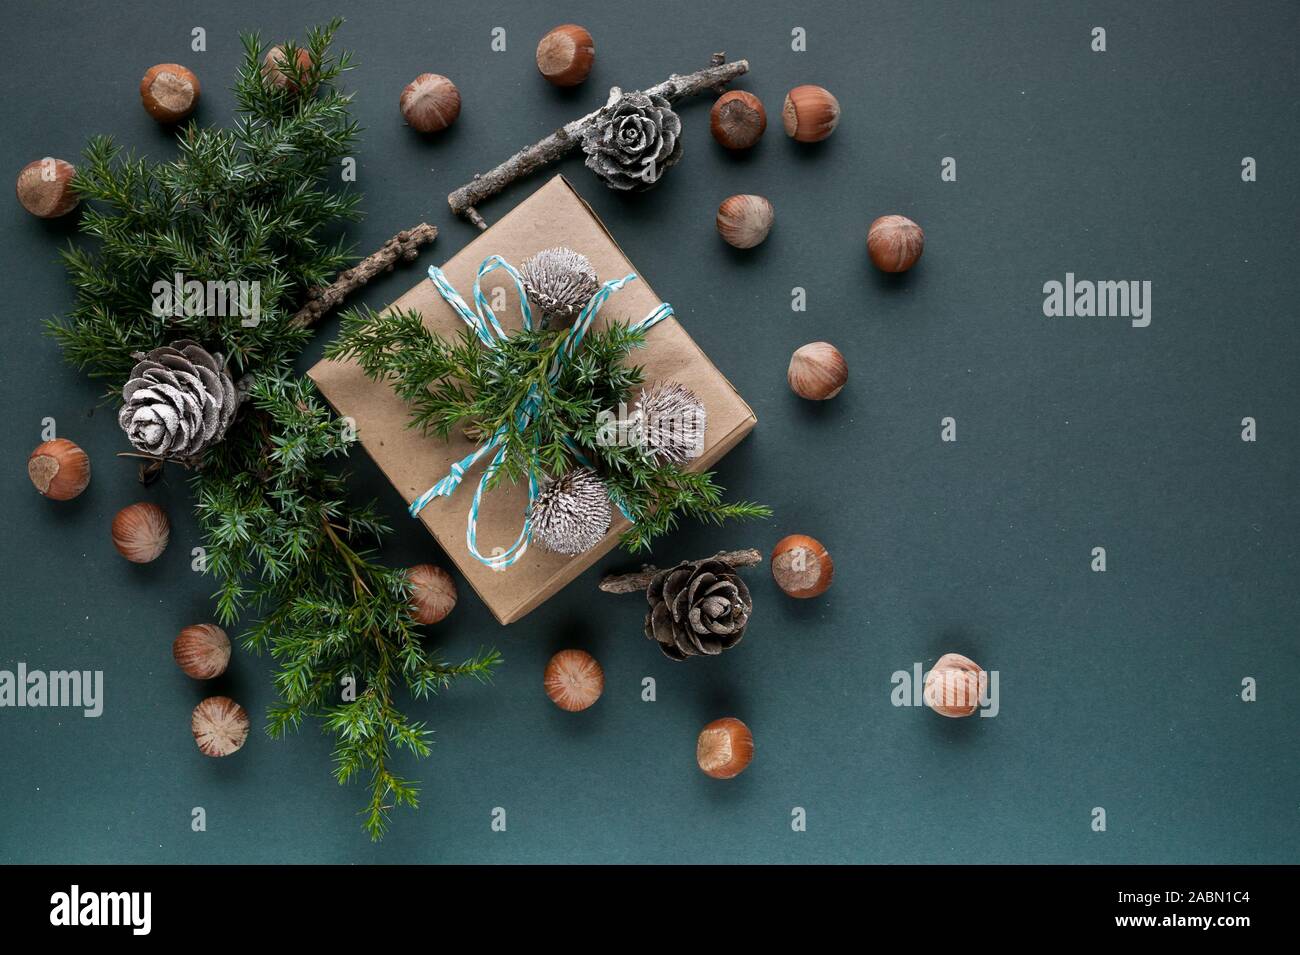 Christmas festive background gift box decoration on a dark green background. Top view Stock Photo